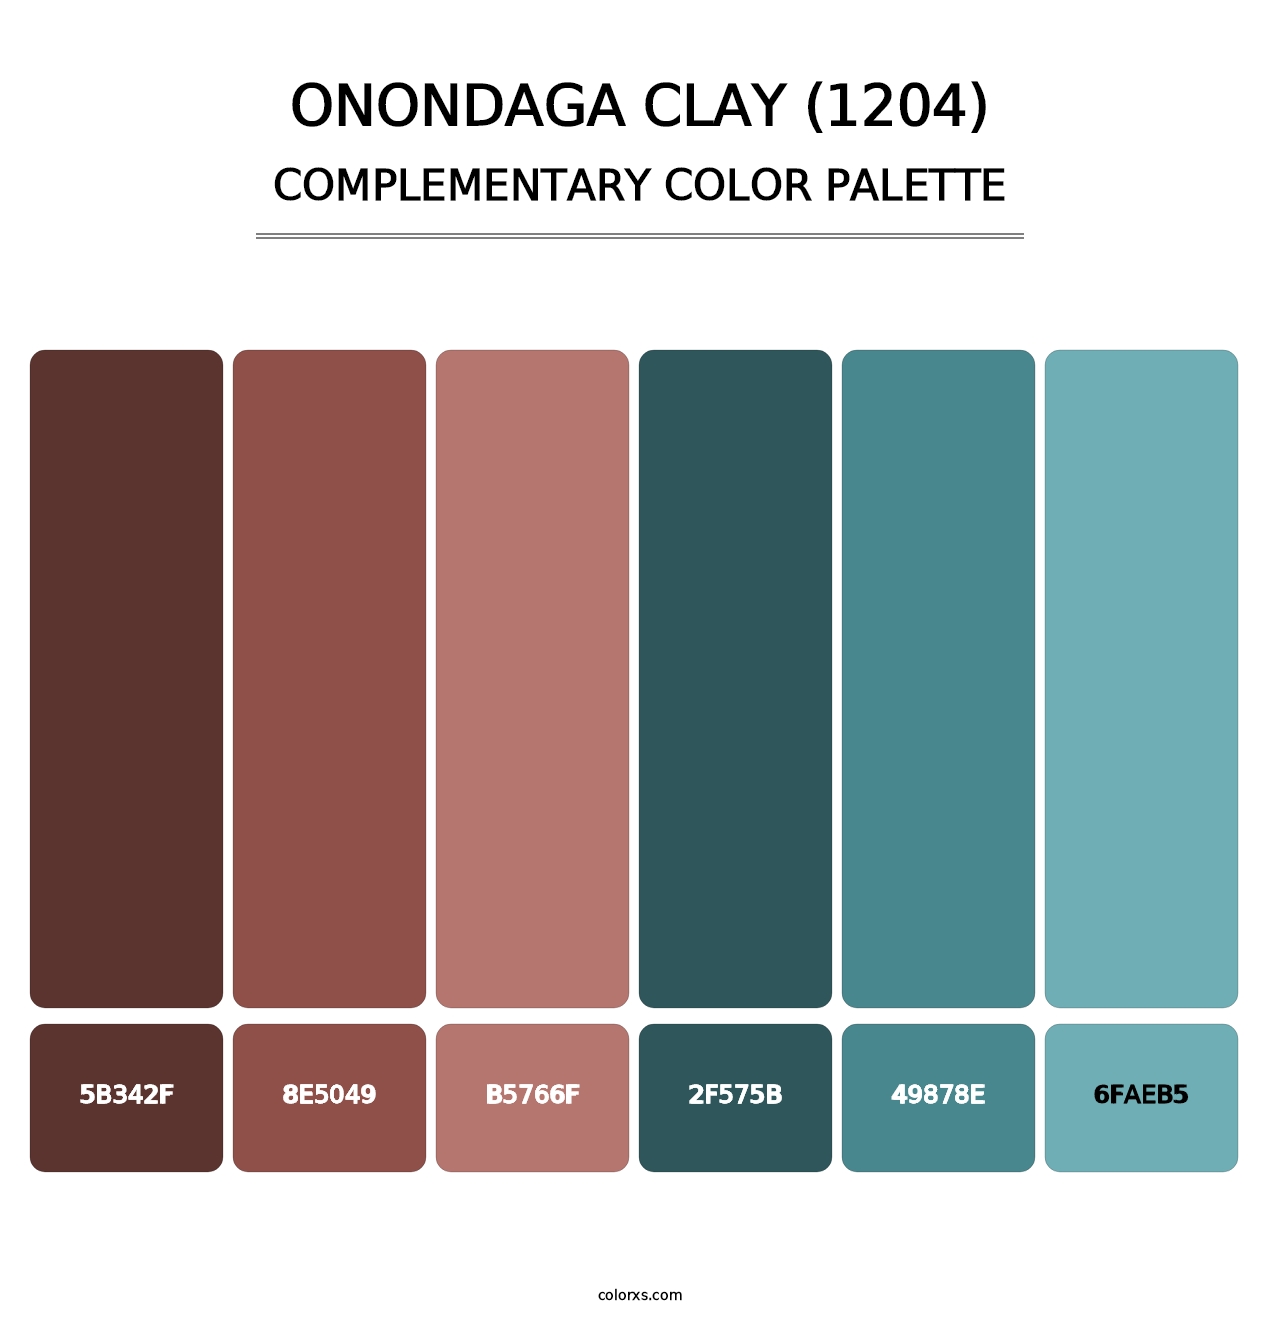 Onondaga Clay (1204) - Complementary Color Palette